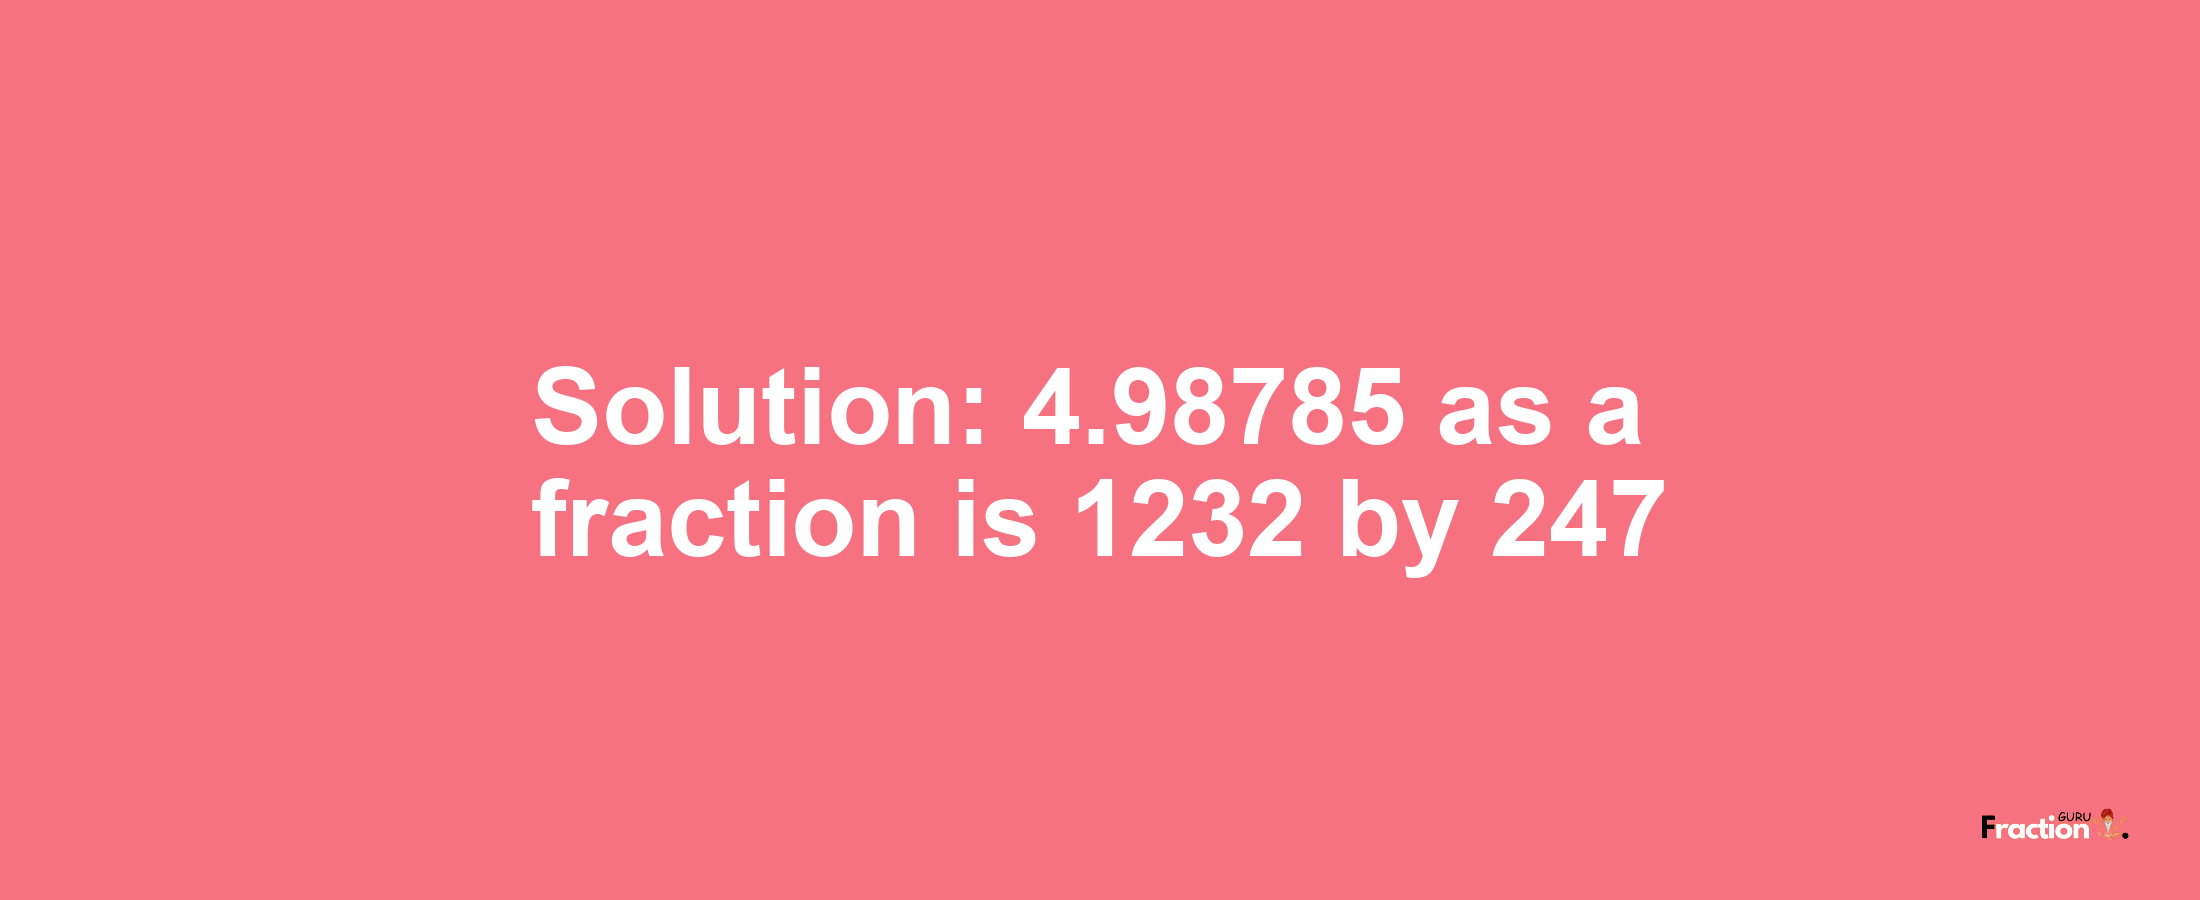 Solution:4.98785 as a fraction is 1232/247